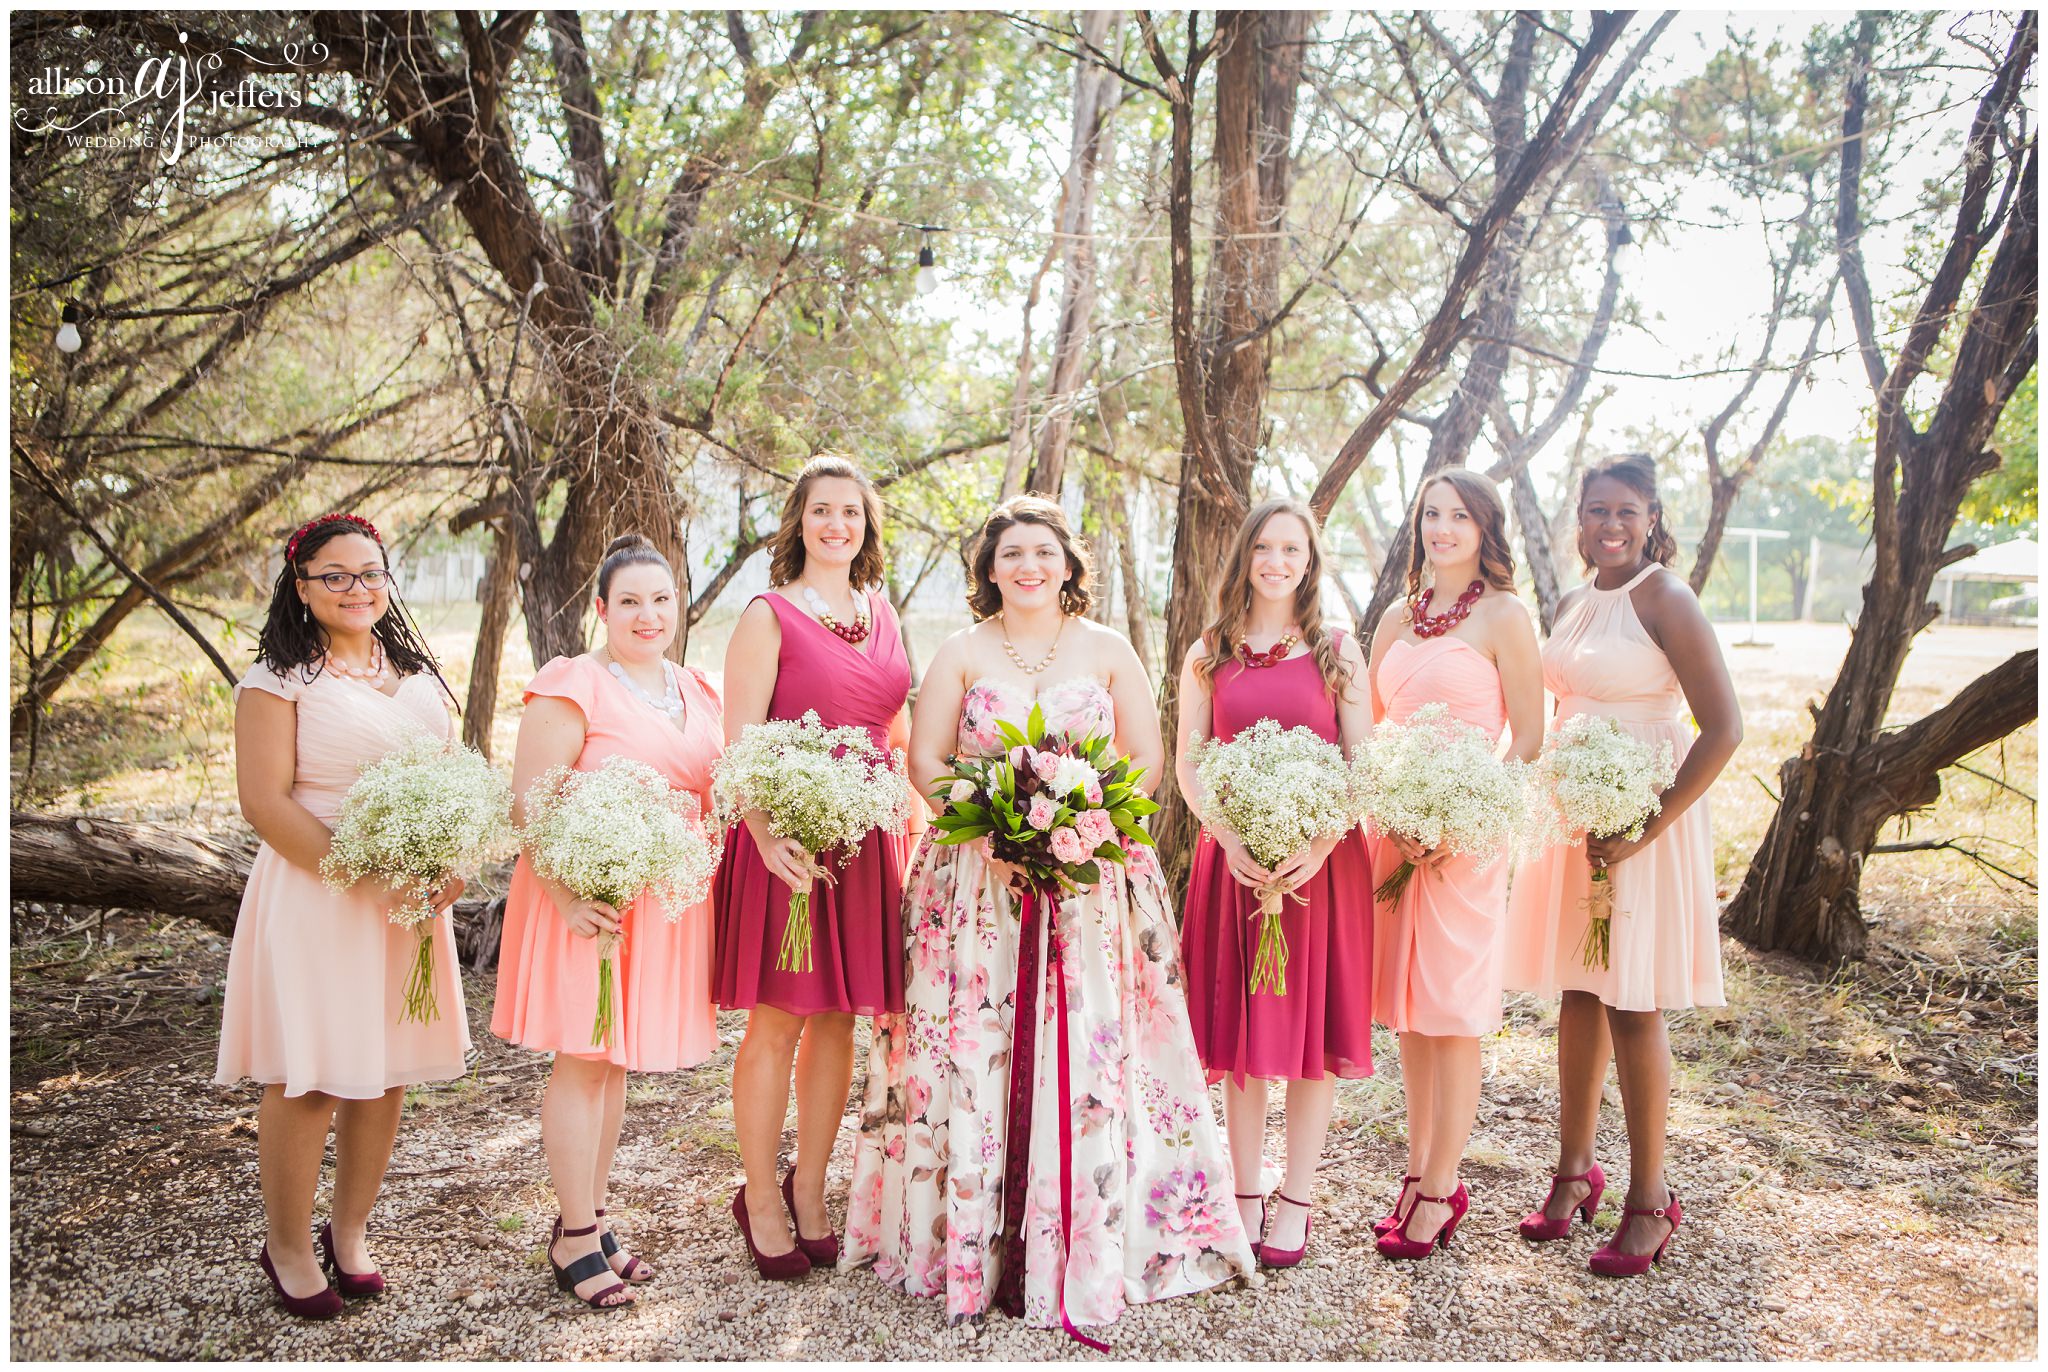 Kerrville Wedding Photographer Unique fun wedding with floral dress 0015